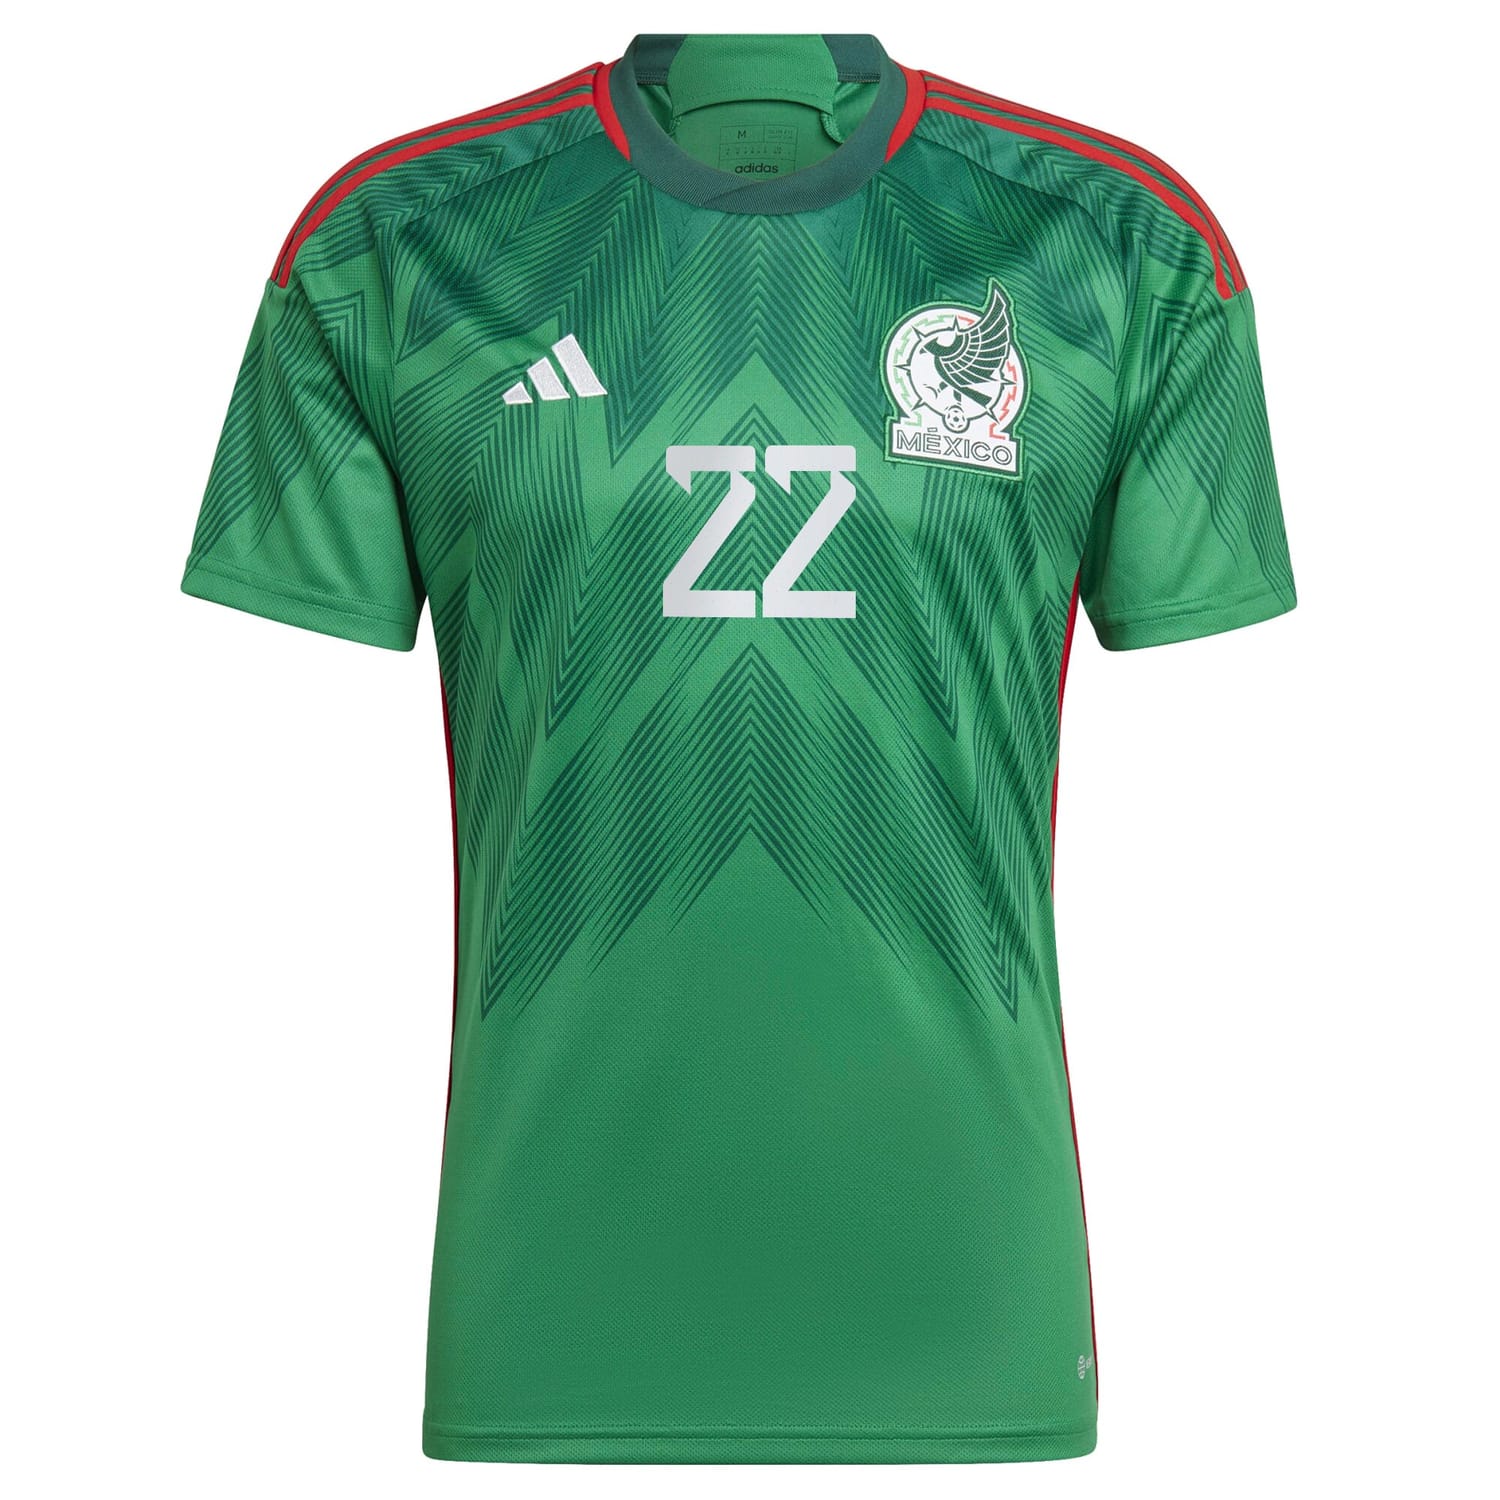 Mexico National Team Home Jersey Shirt Green 2022-23 player Hirving Lozano printing for Men